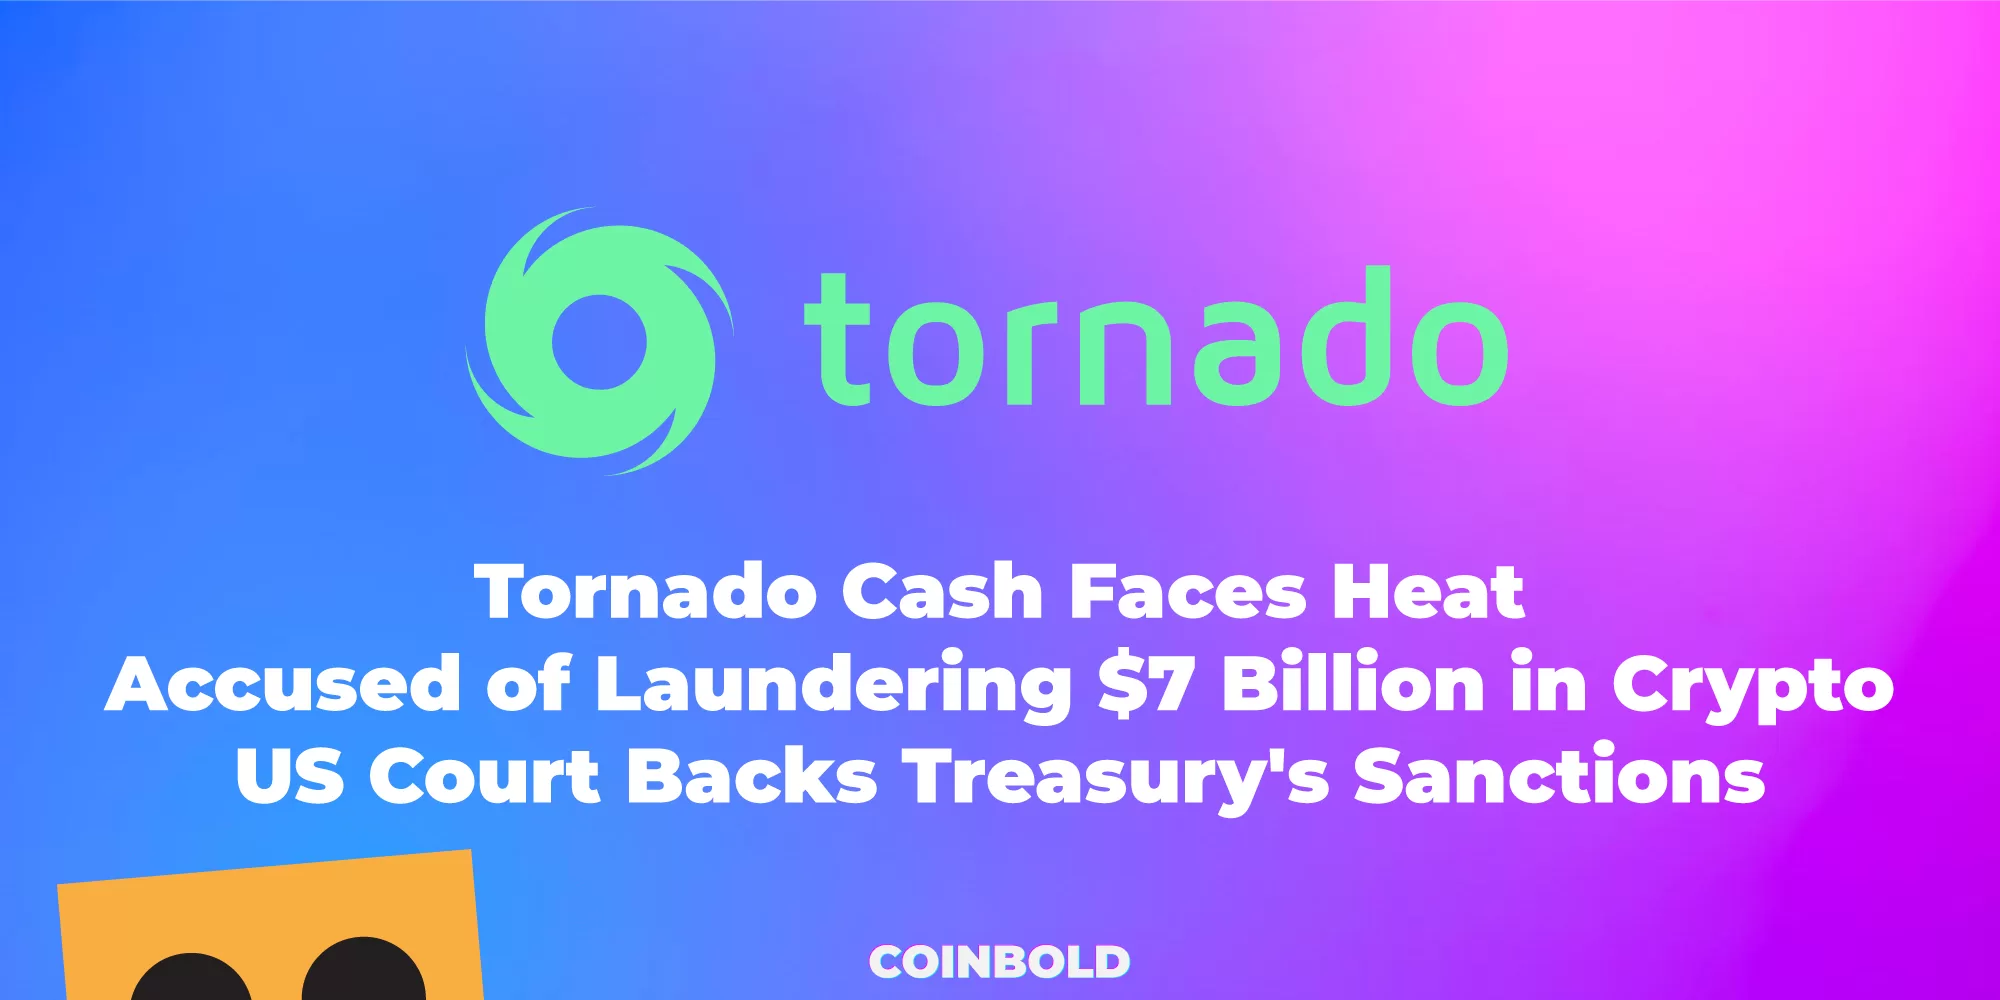 Tornado Cash Faces Heat Accused of Laundering $7 Billion in Crypto, US Court Backs Treasury's Sanctions